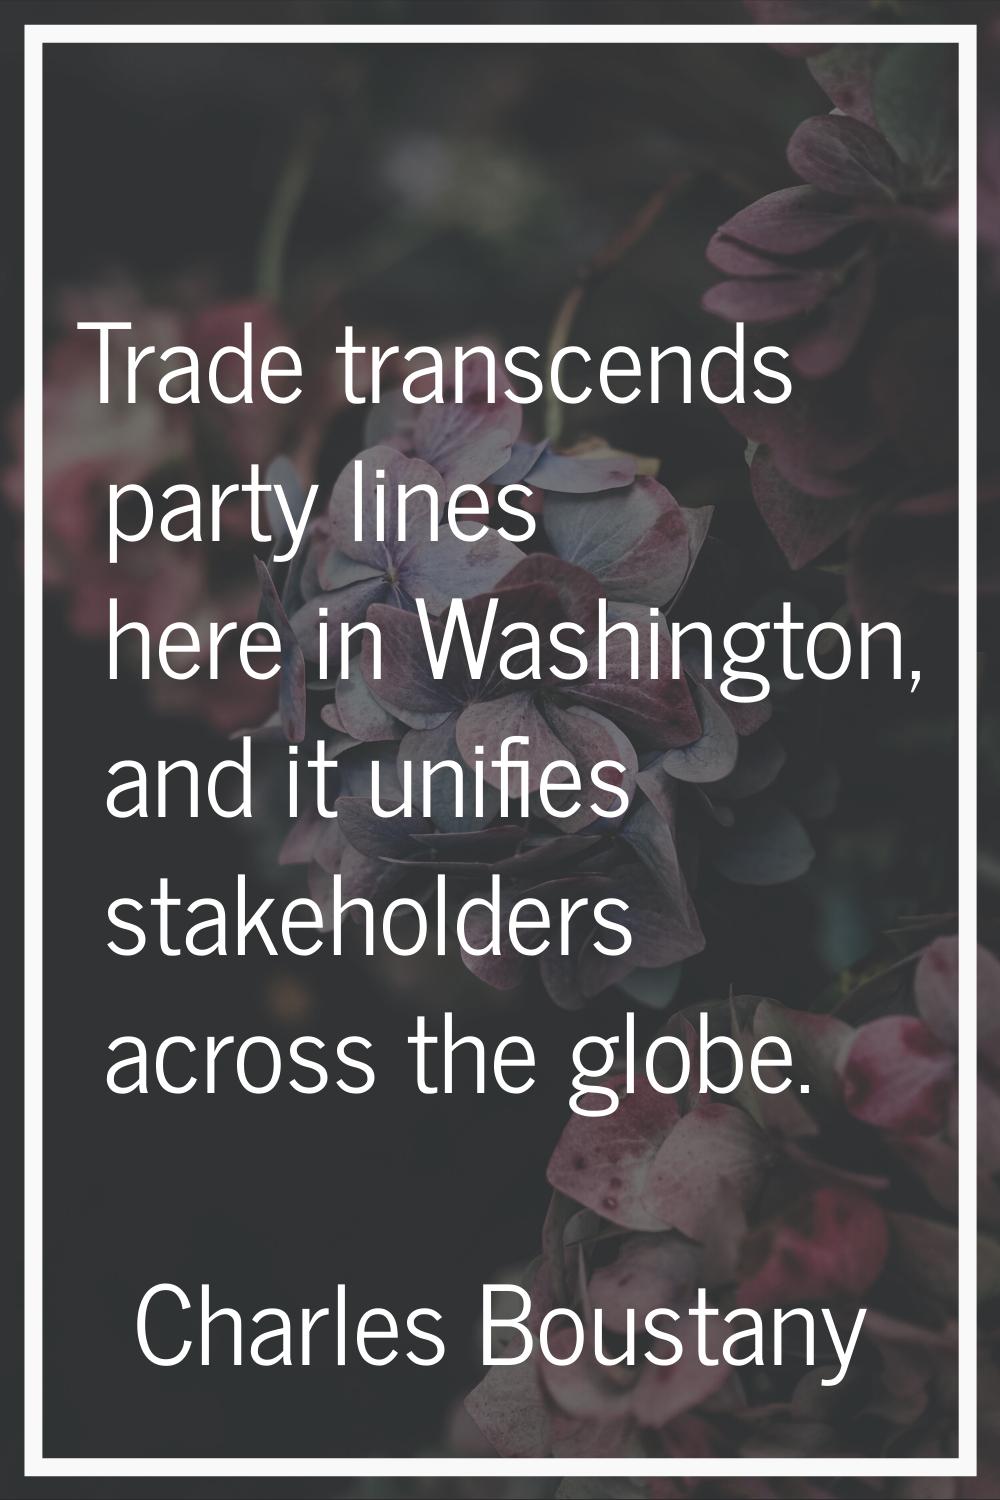 Trade transcends party lines here in Washington, and it unifies stakeholders across the globe.